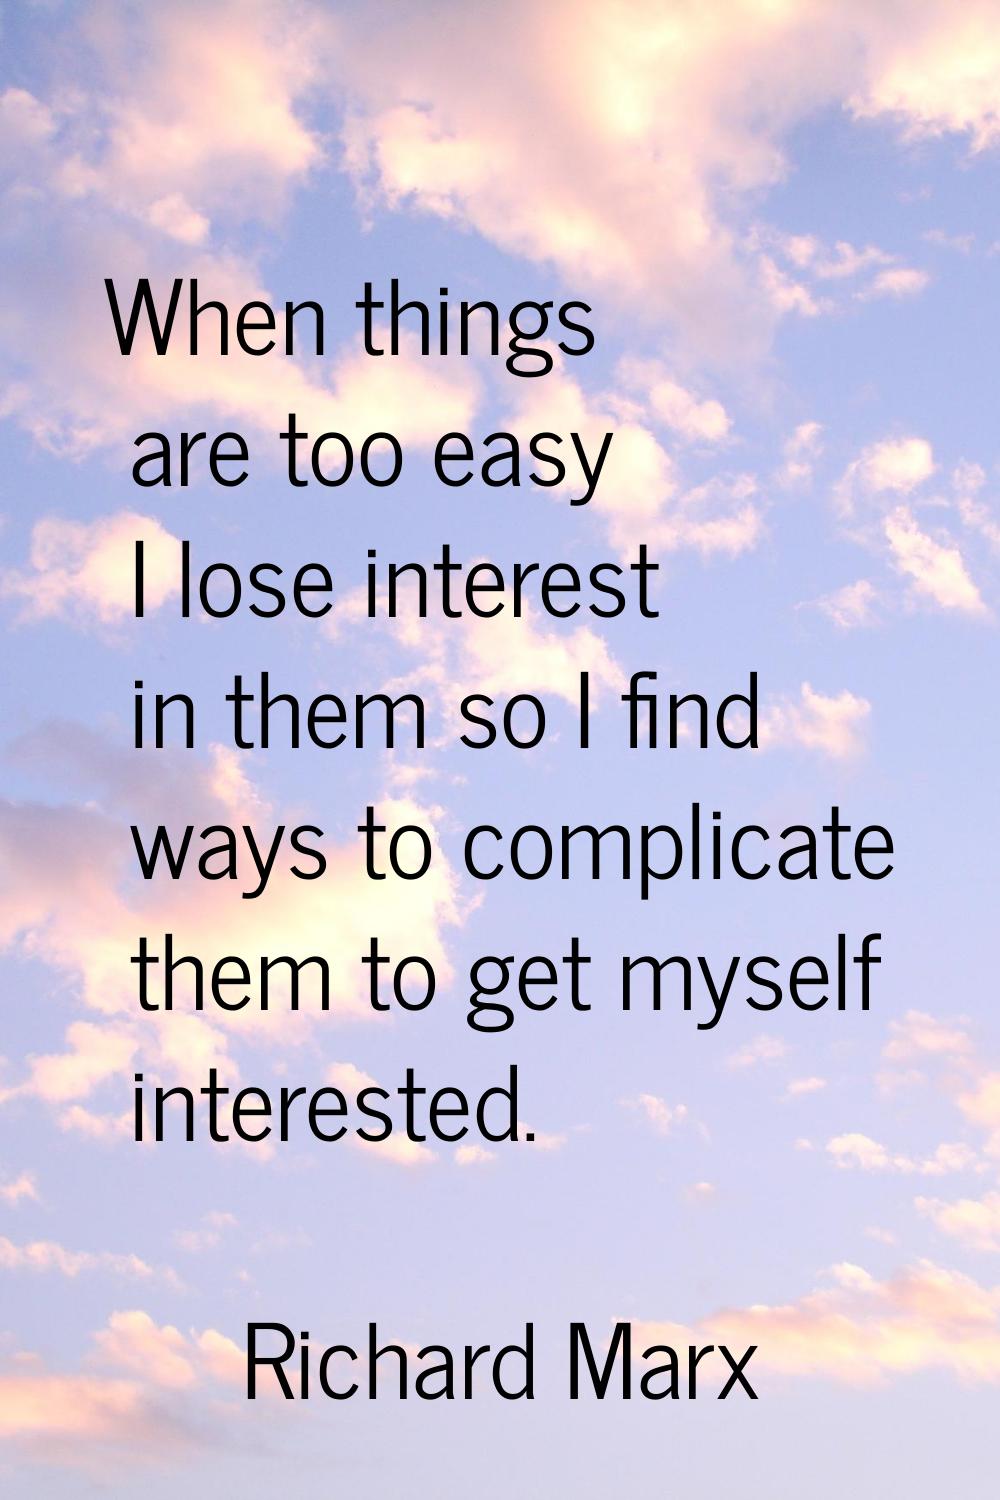 When things are too easy I lose interest in them so I find ways to complicate them to get myself in